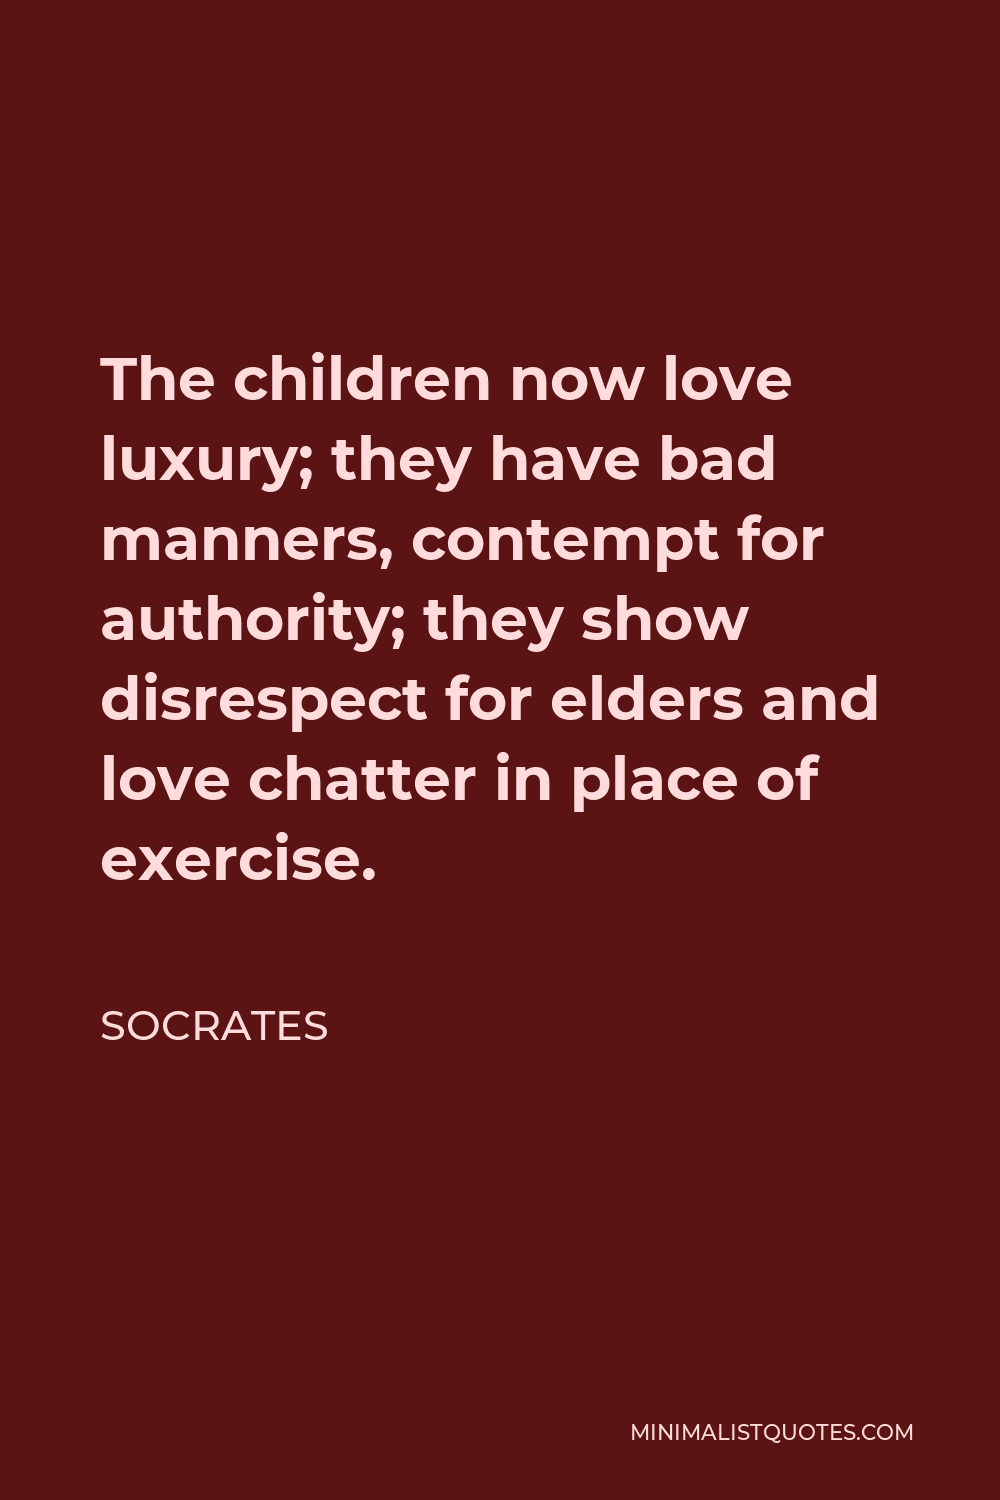 Socrates Quote - The children now love luxury; they have bad manners, contempt for authority; they show disrespect for elders and love chatter in place of exercise.